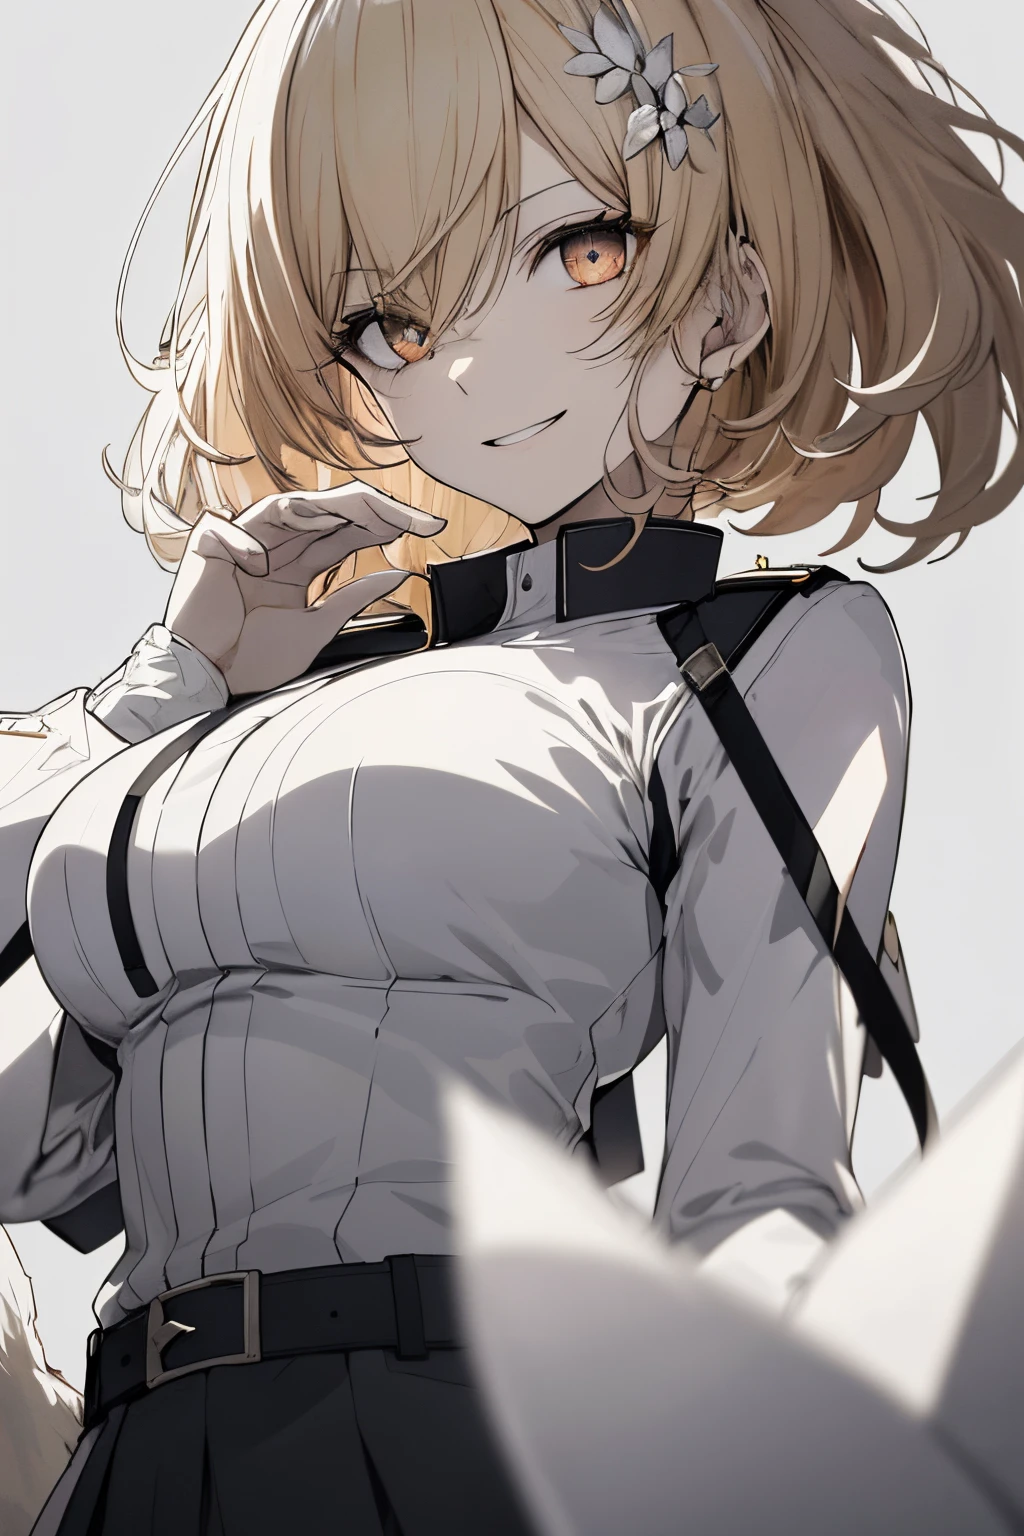 (Super Sexy Pose:1.2), (from below looking up:1.2), 1 girl in, Full body, White one-piece military uniform, (masutepiece:1.2, Best Quality), (finely detailed beautiful eye: 1.2), (beautifull detailed face), High contrast, (Best Illumination, extremely delicate and beautiful), ((Cinematic Light)), Dramatic light, Intricate details, dark orange eyes, Undersized boobs, Belt under , White military uniform, White skirt,blonde  hair, Black tie,  (Pale white background:1.5), Wolf cut hair, accurate hands, Look at me and smile, ruddy skin